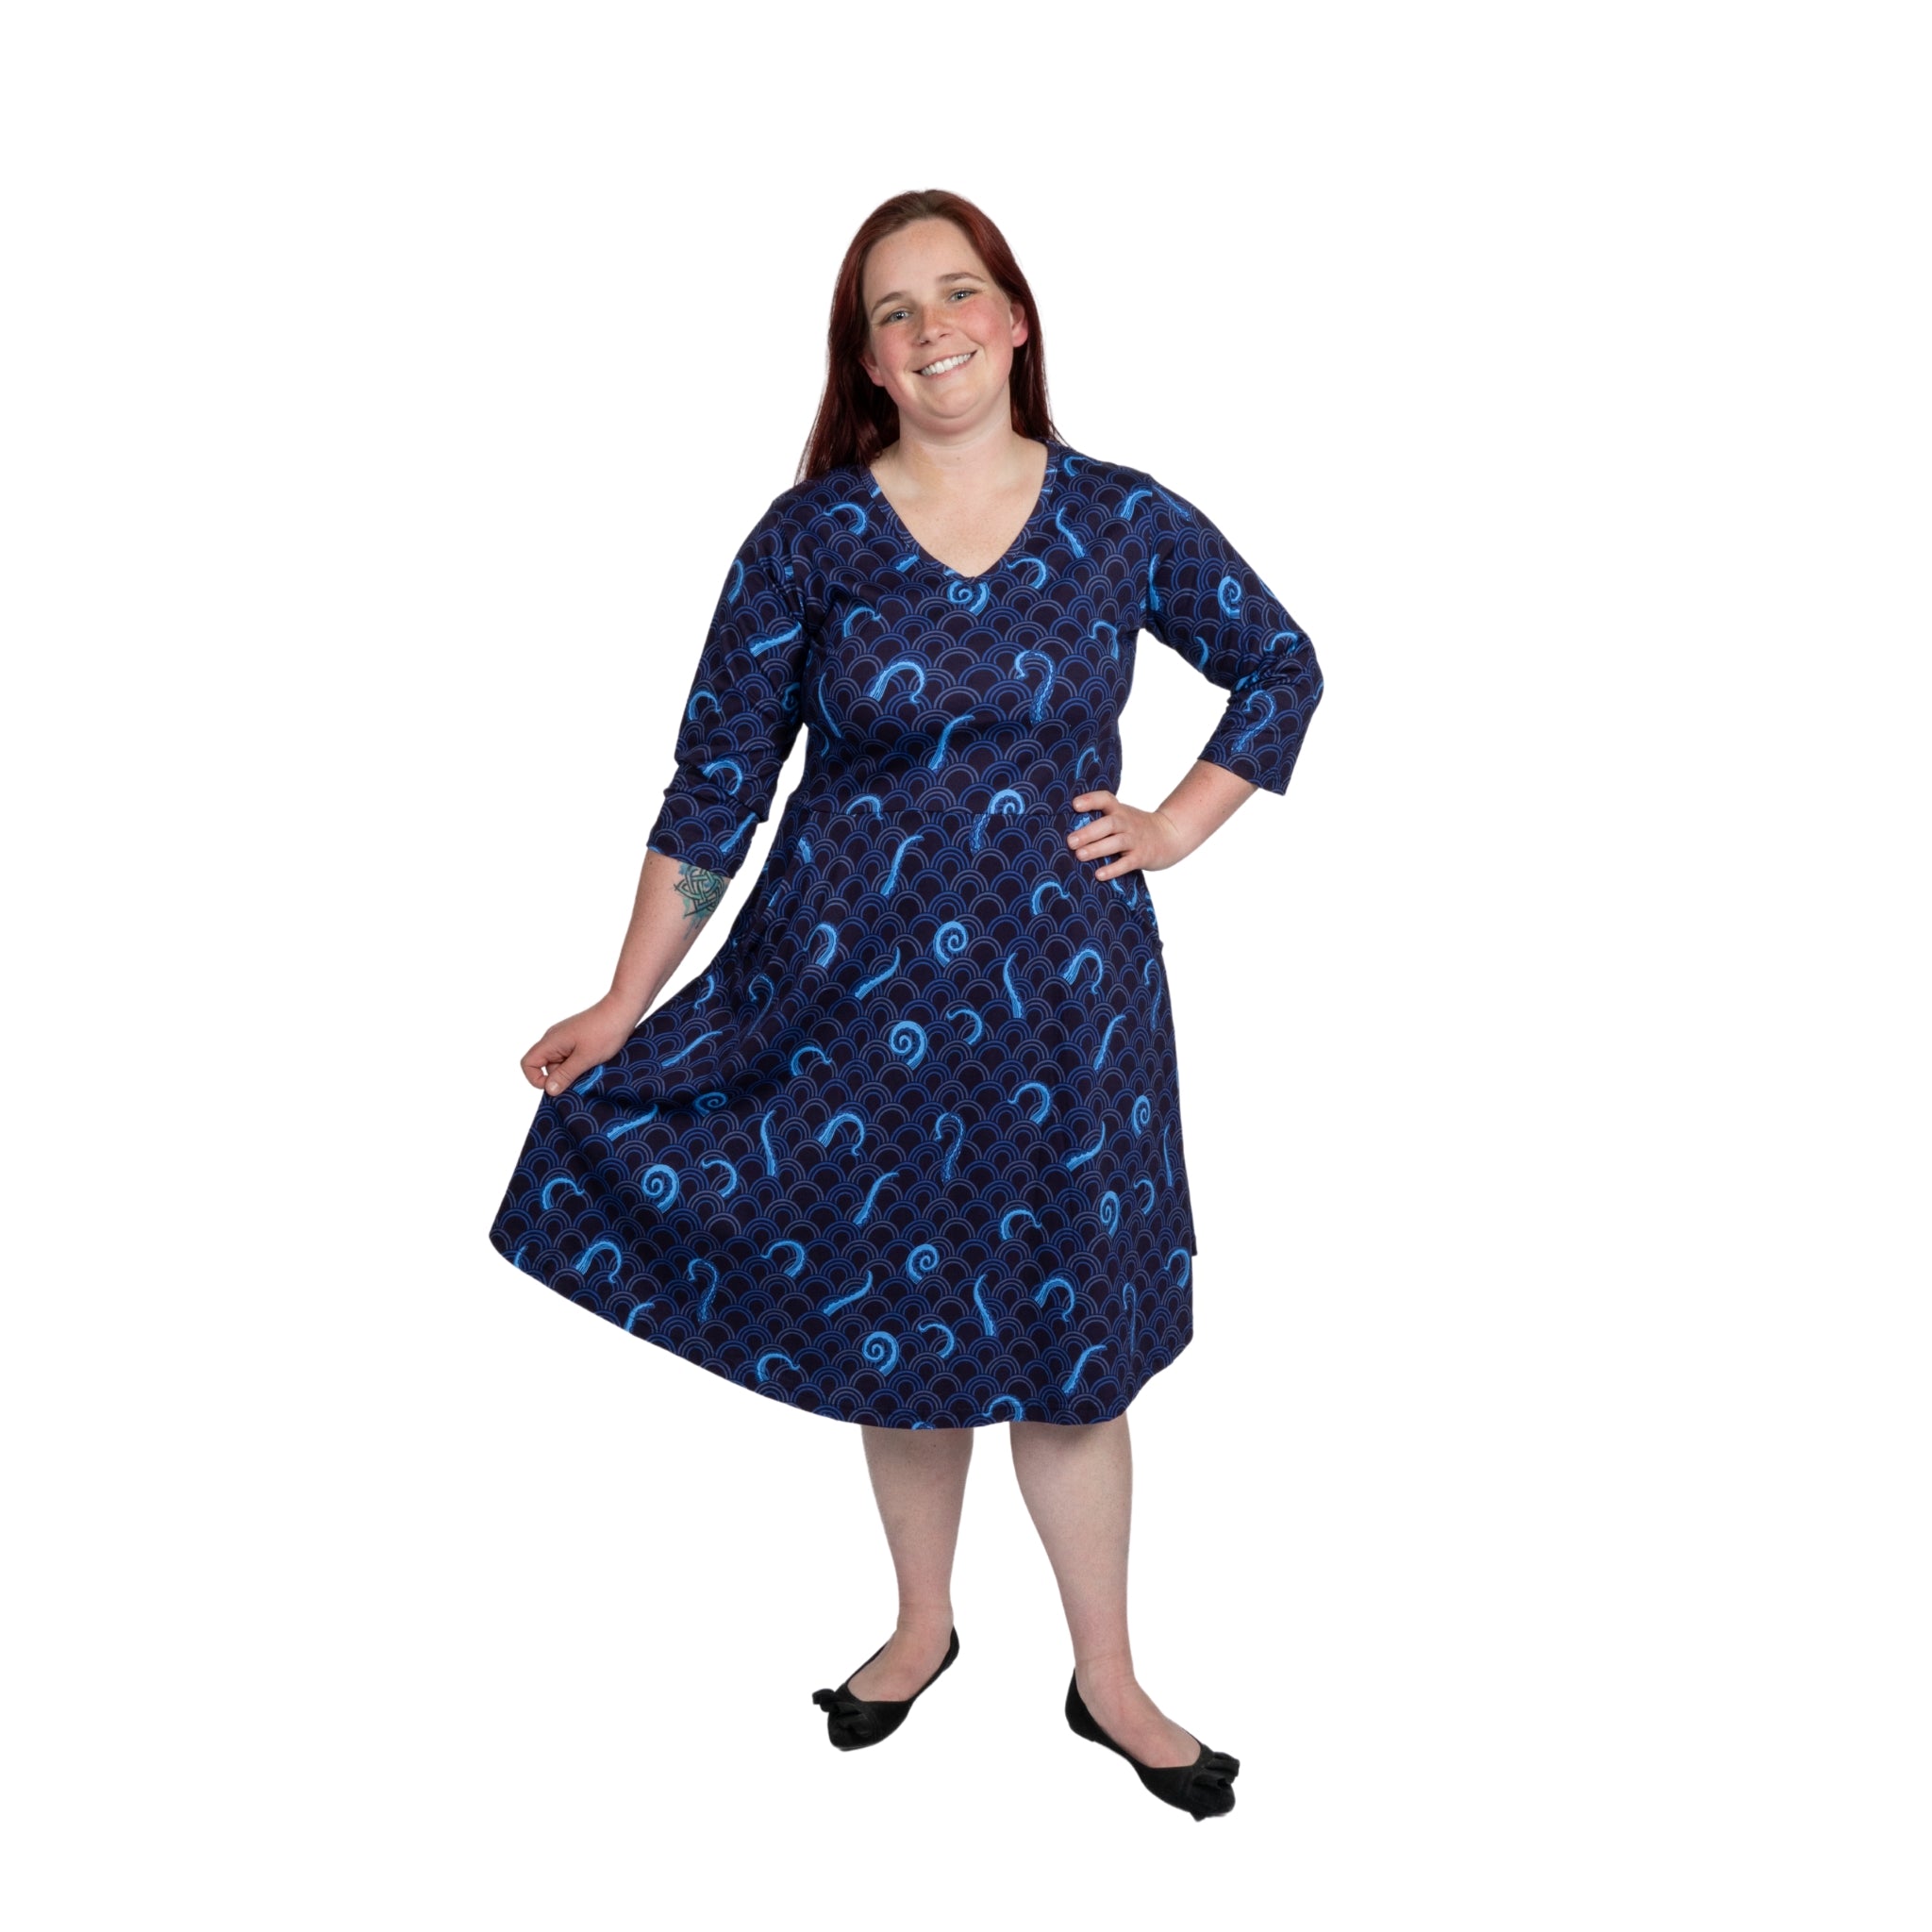 Octopus in the Sea 3/4th Sleeves Fit & Flare Dress